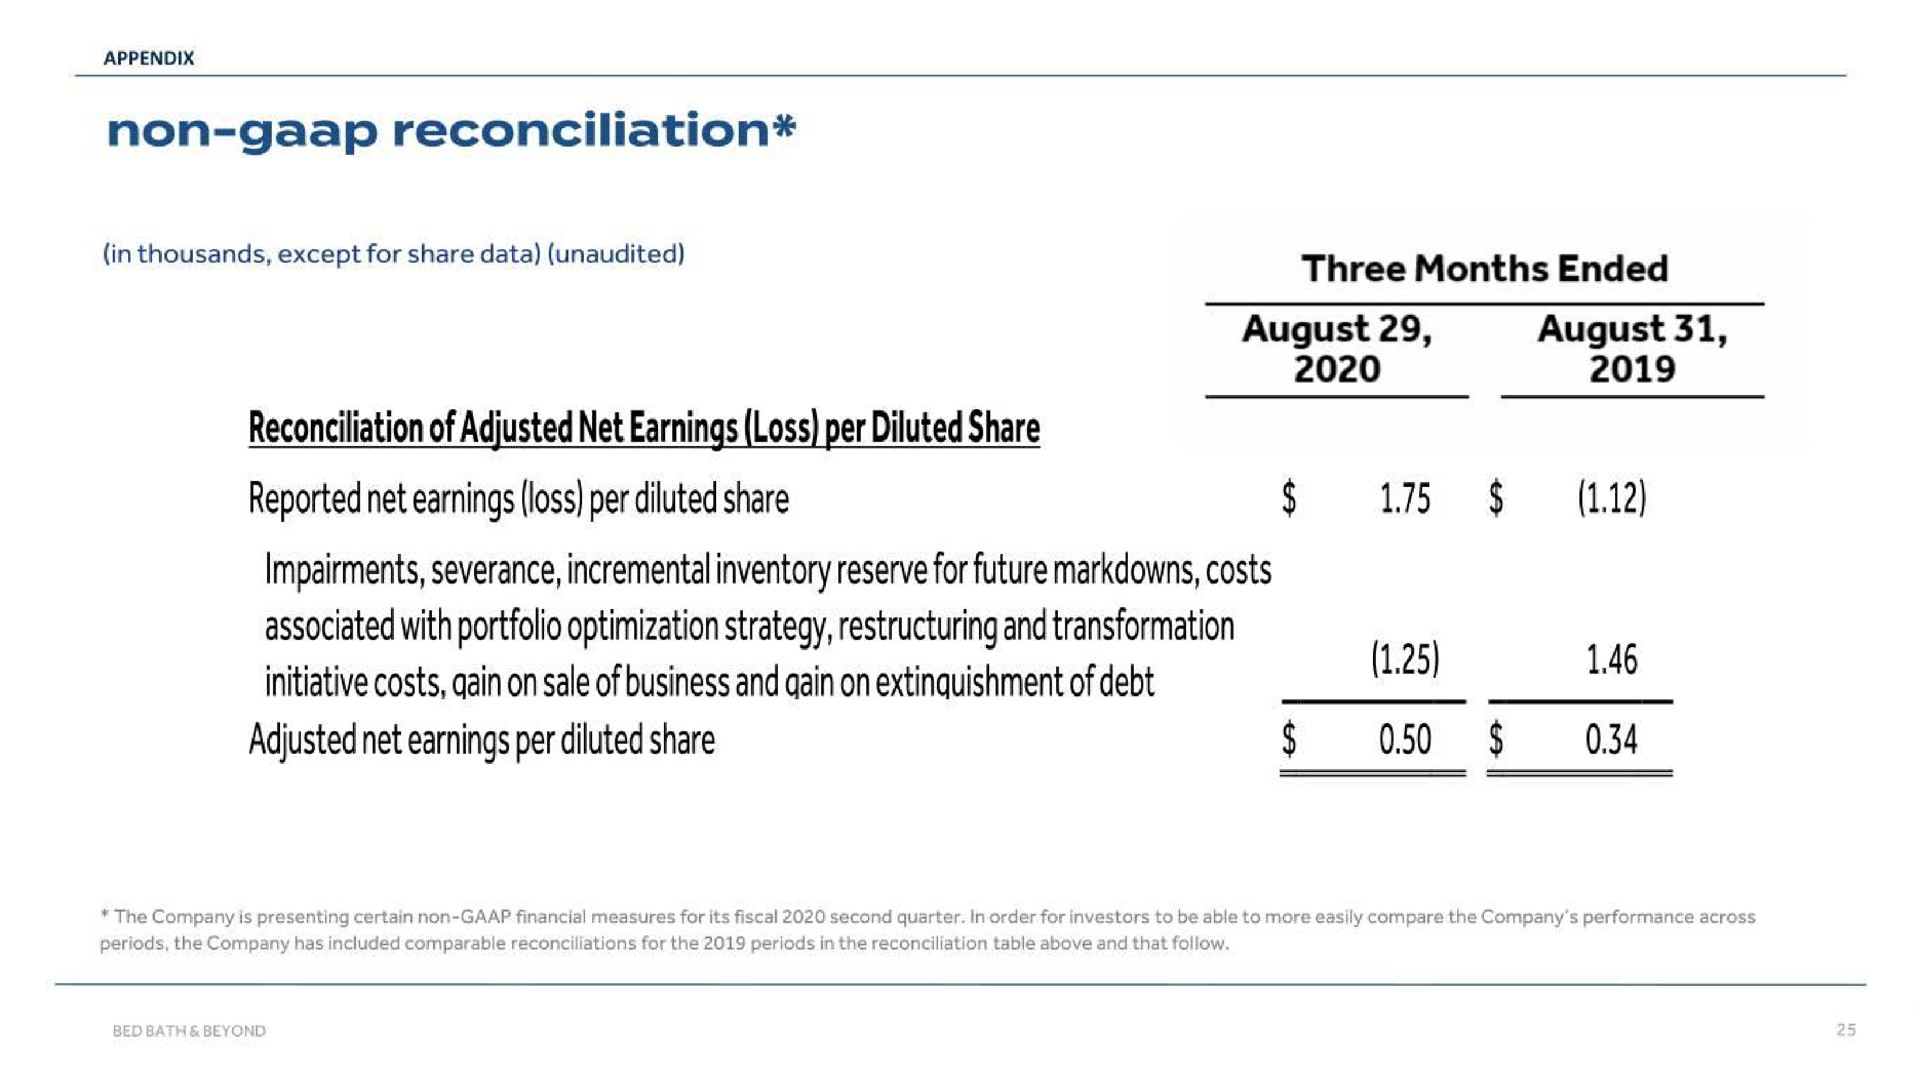 non reconciliation august august reconciliation of adjusted net earnings loss per diluted share reported net earnings loss per diluted share impairments severance incremental inventory reserve for future costs associated with portfolio optimization strategy and transformation initiative costs on sale of business and gain on of debt adjusted net earnings per diluted share | Bed Bath & Beyond